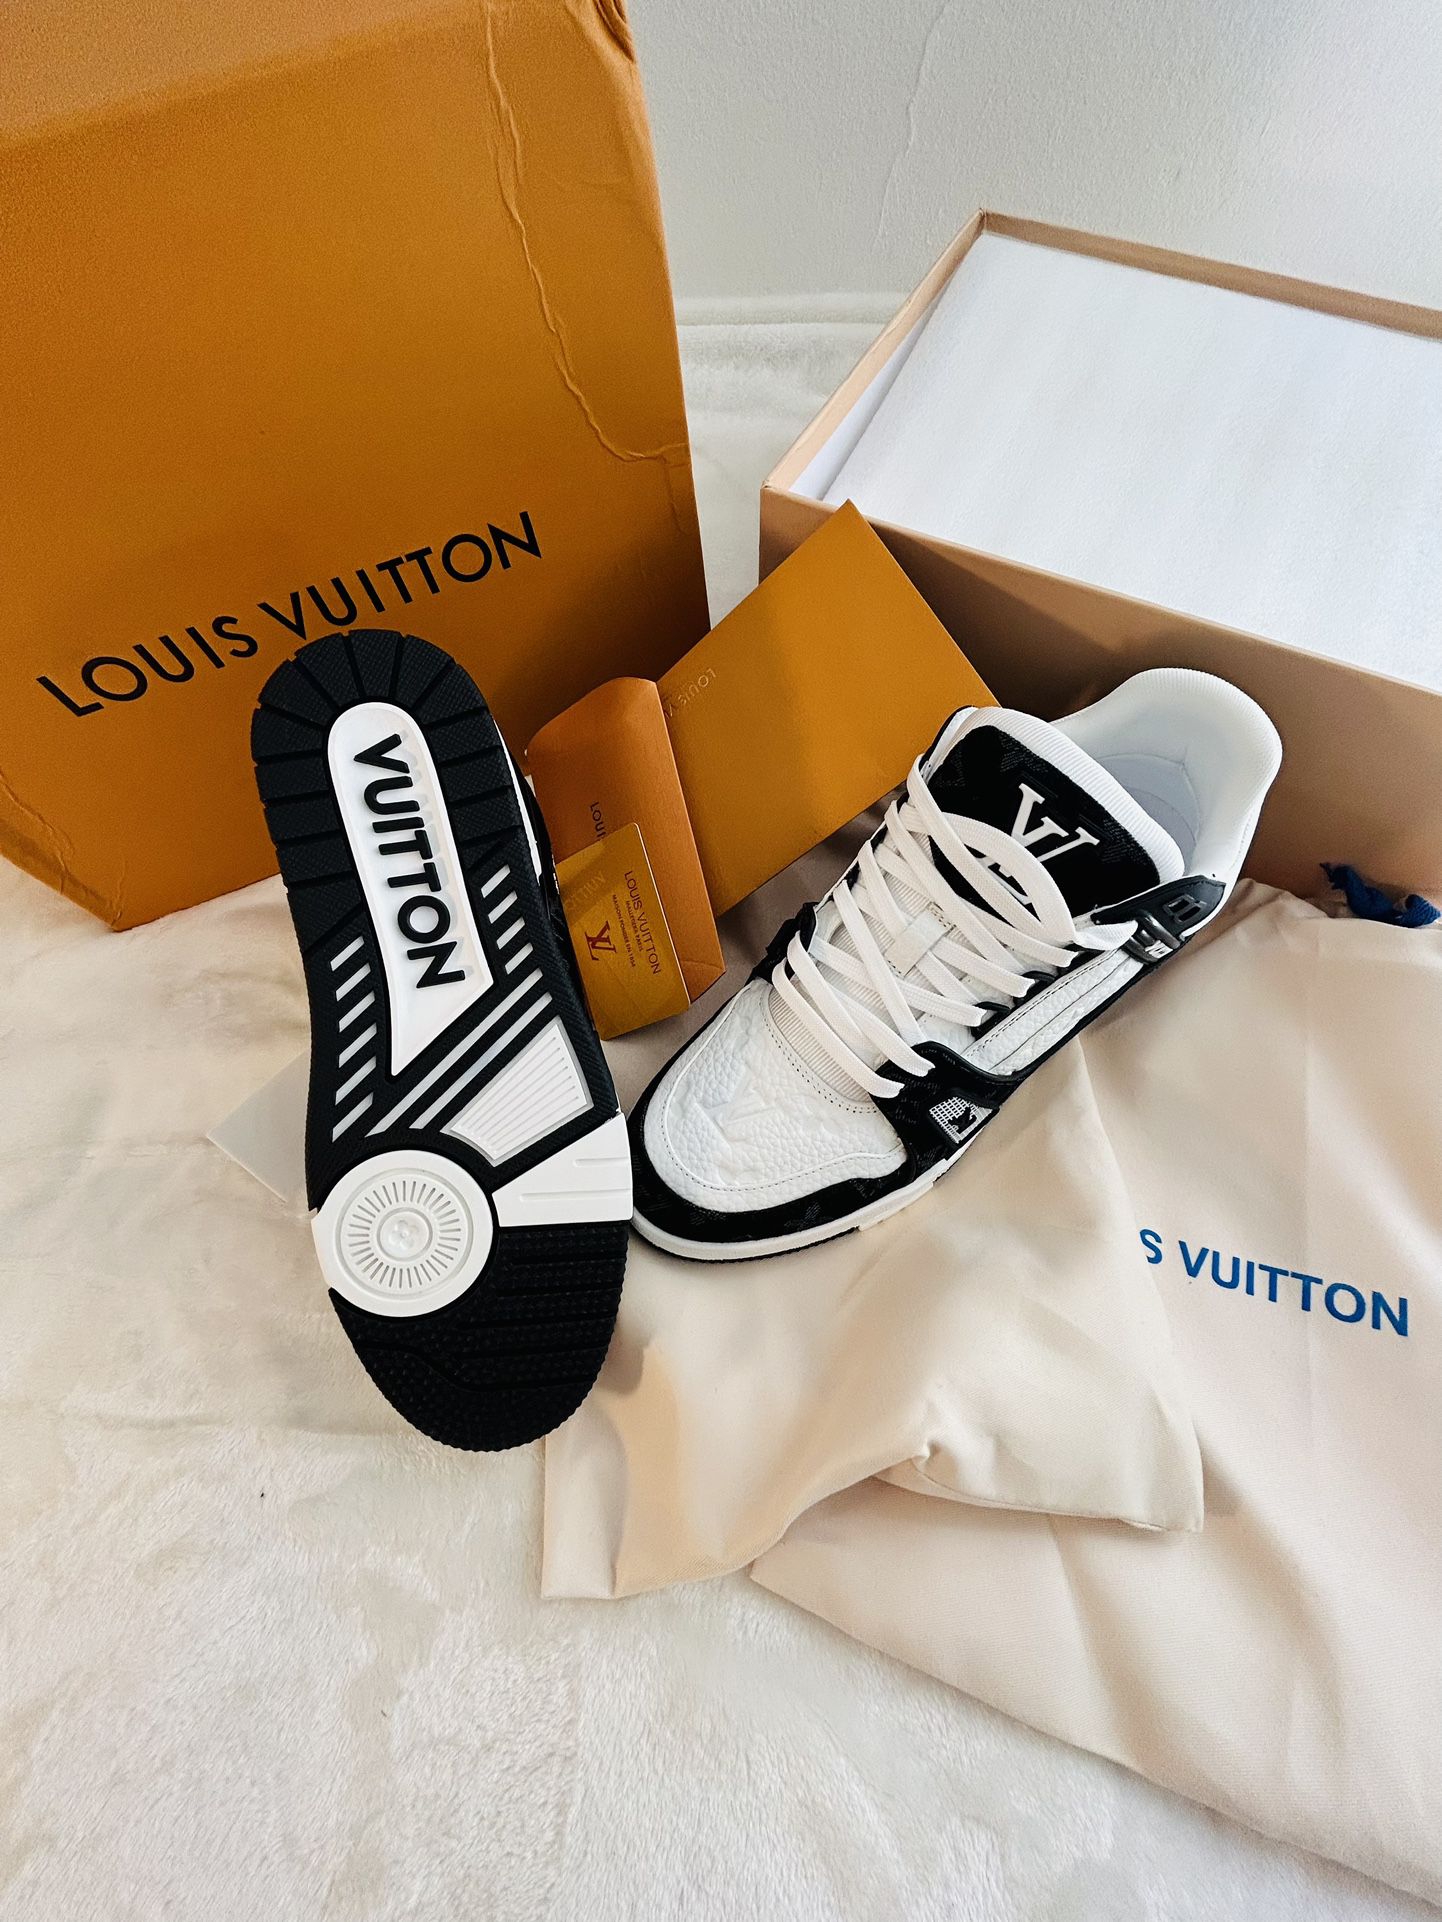 LOUIS VUITTON DREAM ON Mens Black LV Monogram Suede And Leather Sneakers  Size 12 **LIKE NEW for Sale in Hollywood, FL - OfferUp